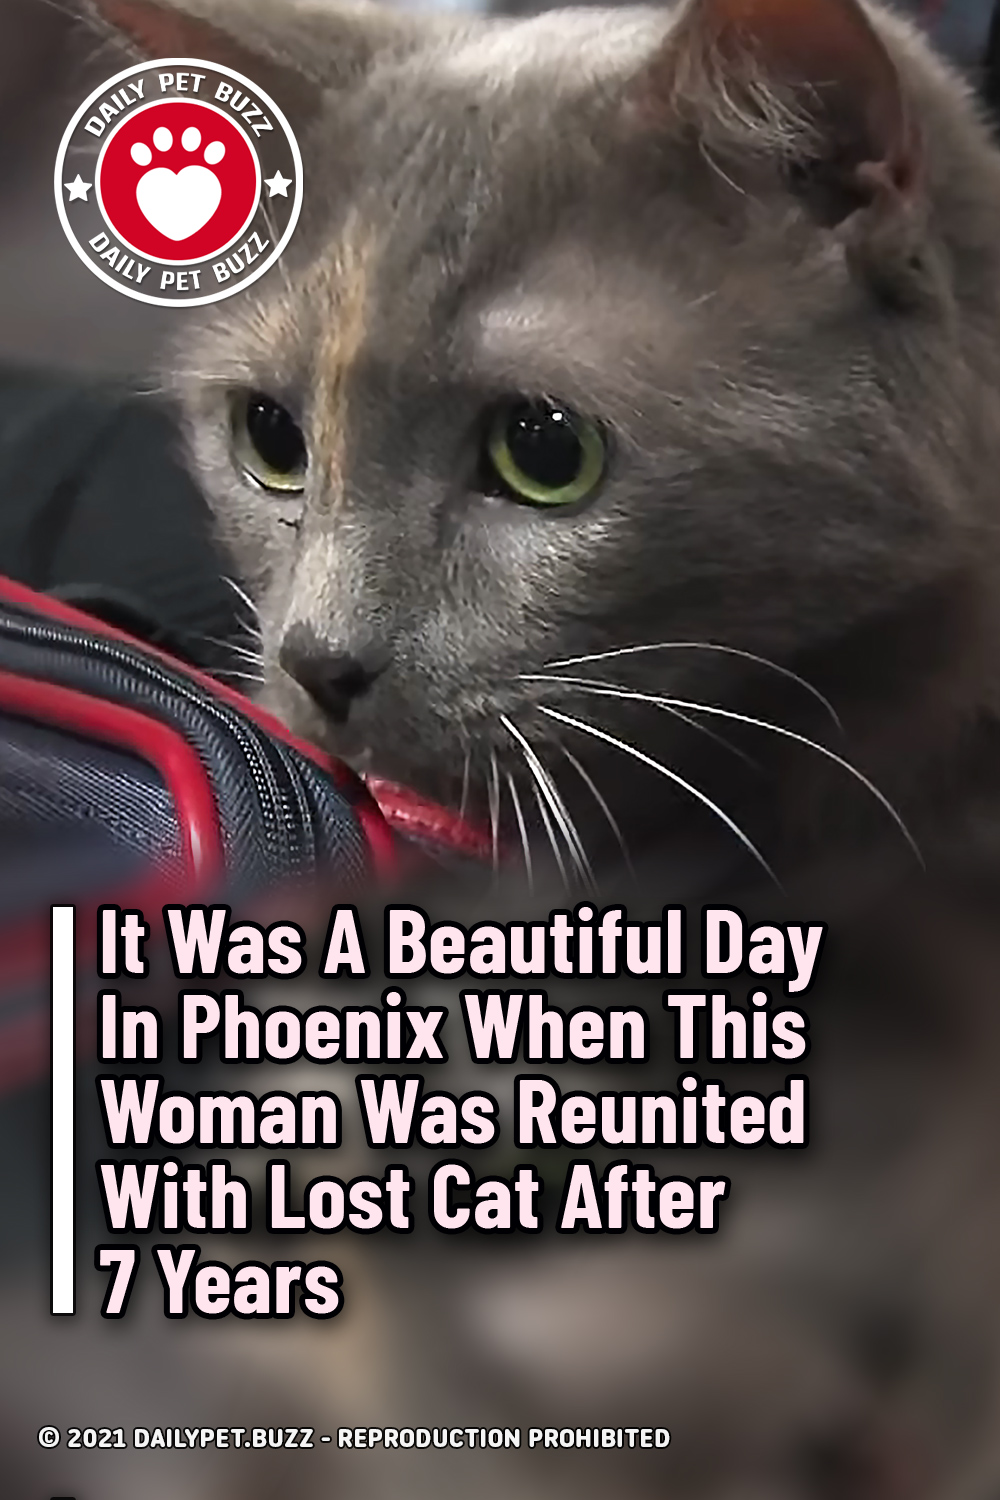 It Was A Beautiful Day In Phoenix When This Woman Was Reunited With Lost Cat After 7 Years